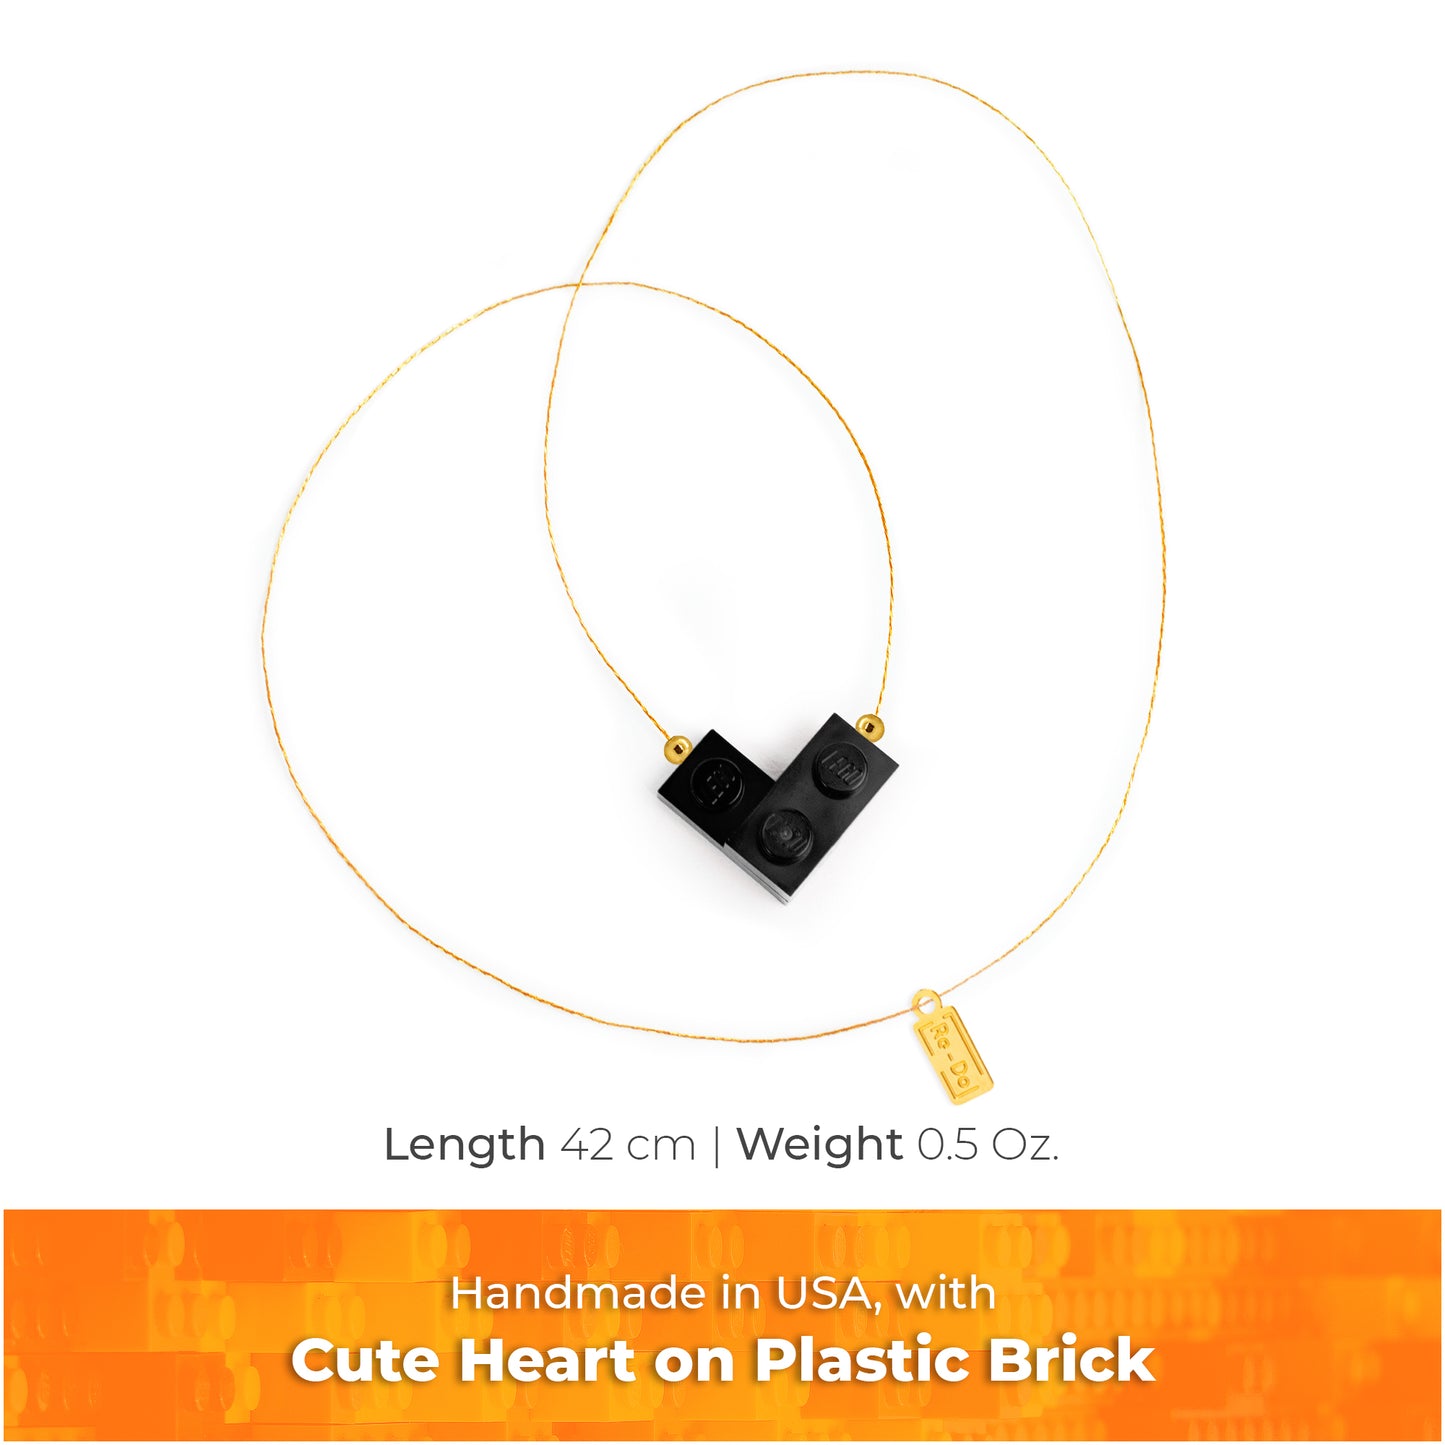 Black Bricking Heart Choker with 16’ Golden String. Cute and Trendy.